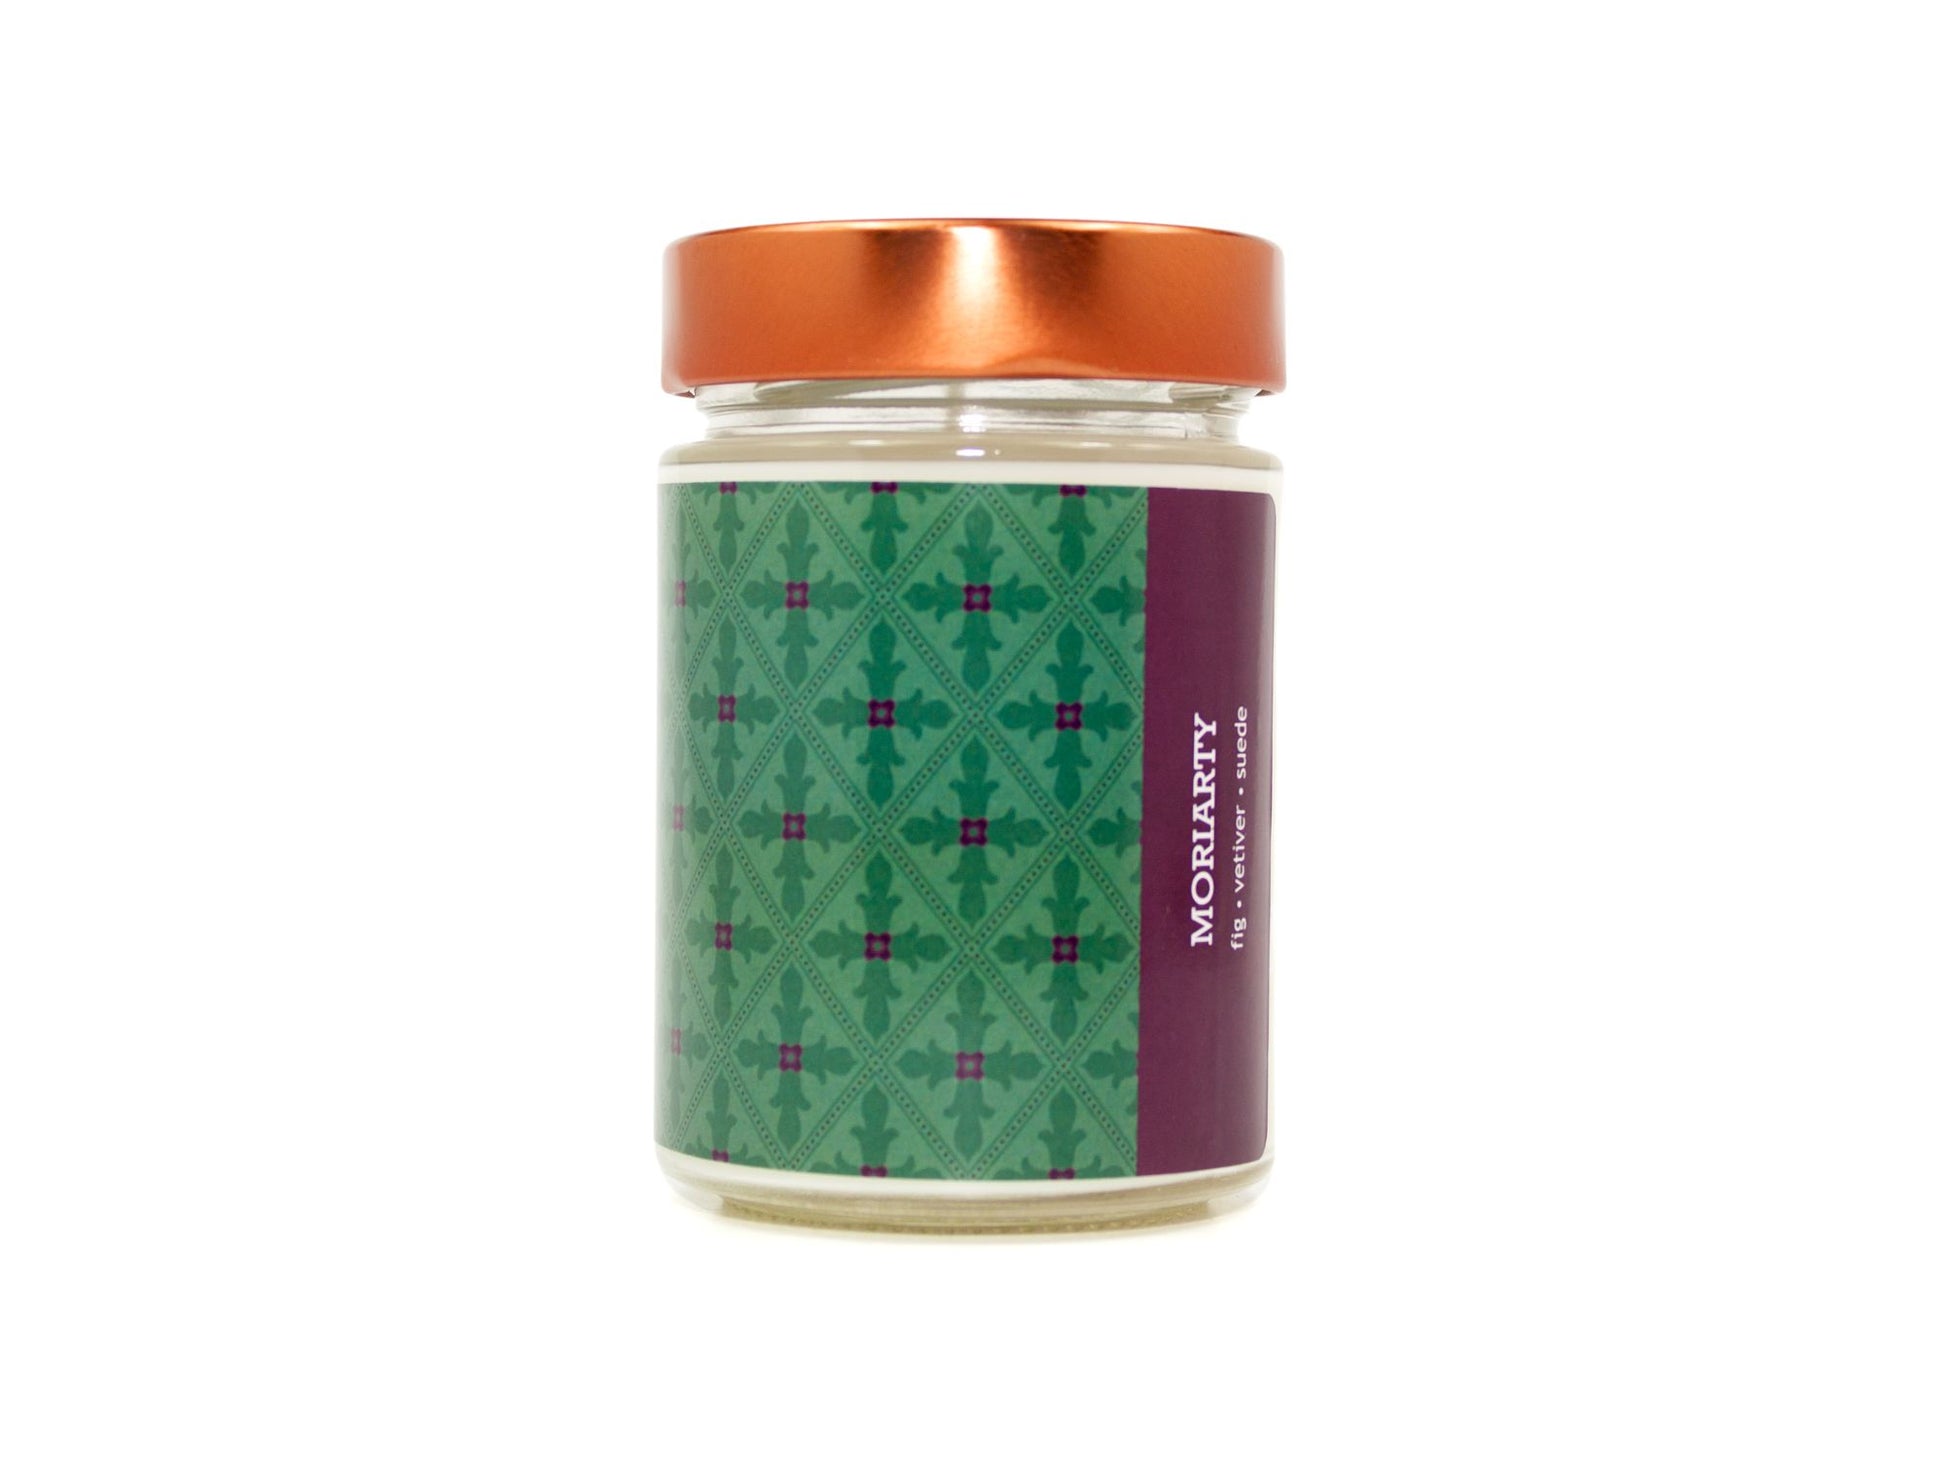 Onset & Rime fig and vetiver scented candle called "Moriarty" in a 10 oz glass jar with copper lid. The label is a deep green gothic-style pattern. The text on the label is "Moriarty - Fig, Vetiver, Suede".